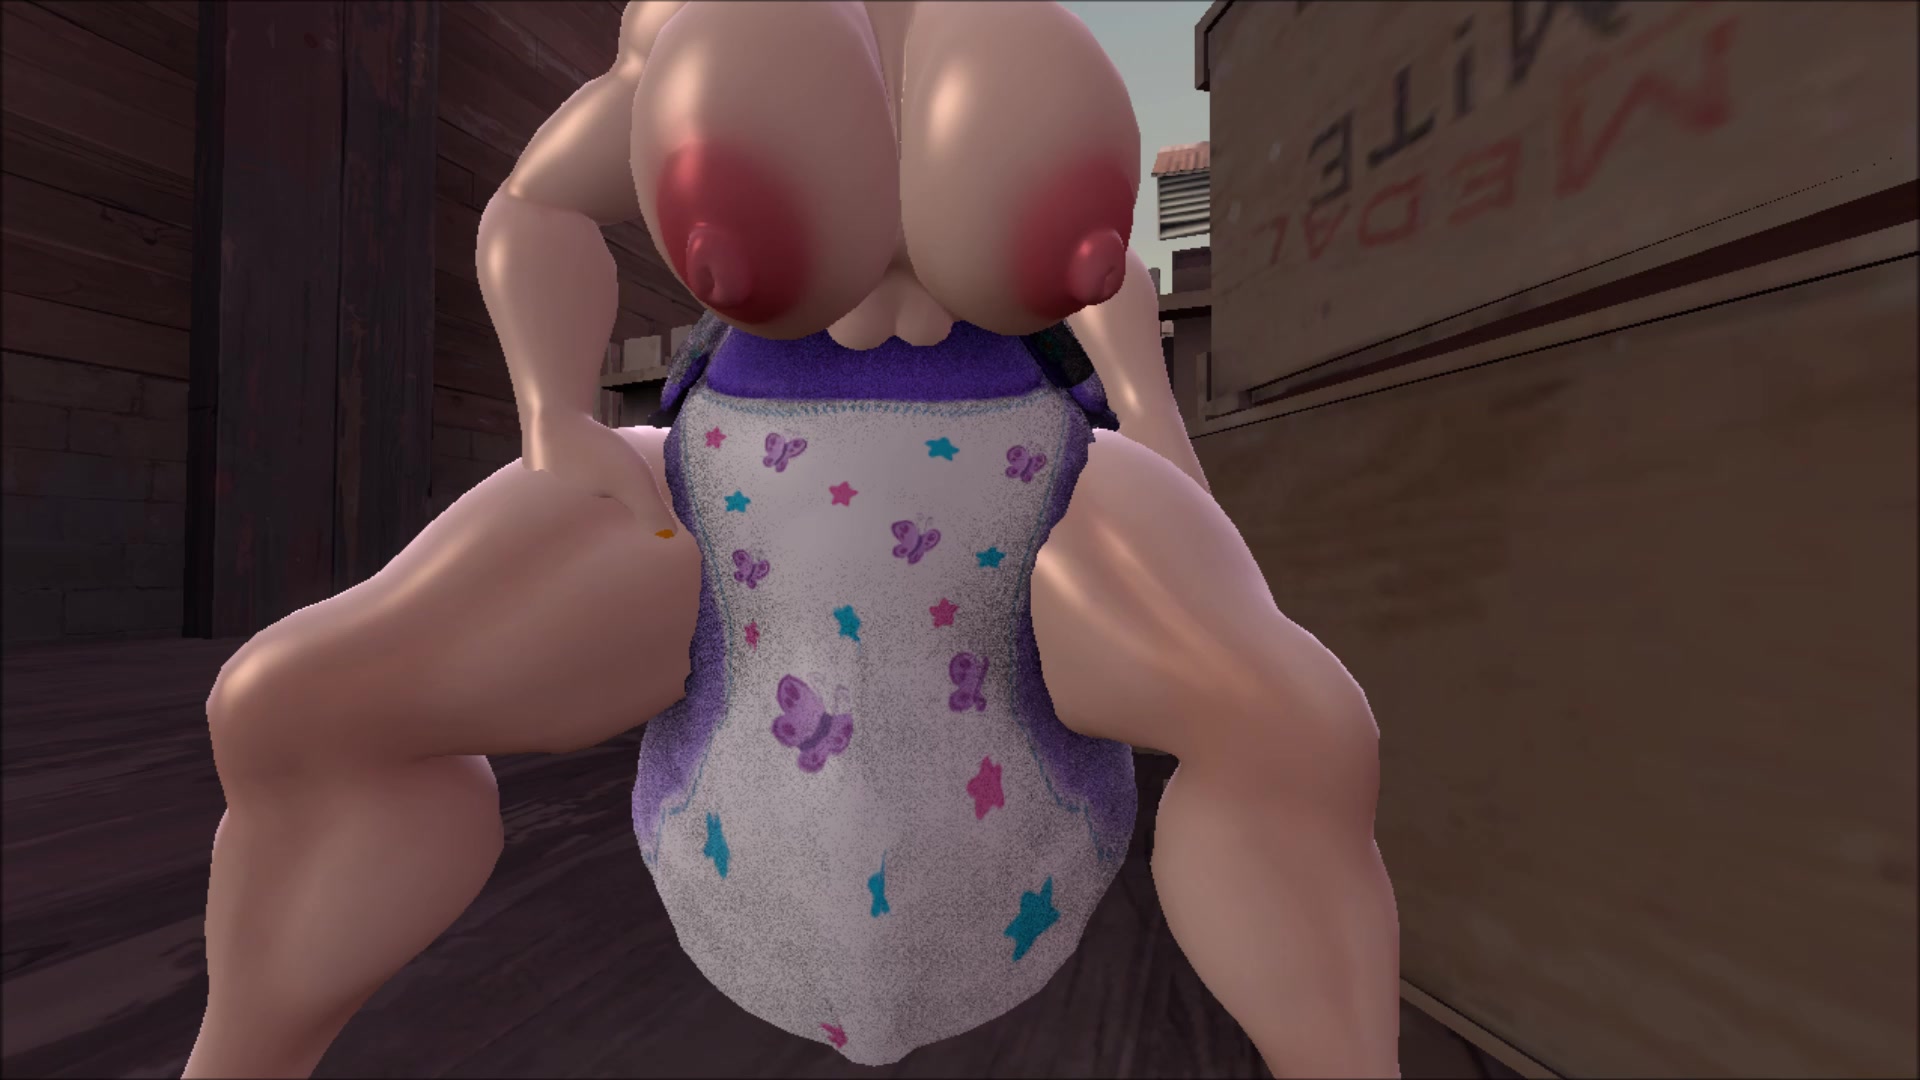 Poop Porn Fap - Daisy Diaper Poop [SFM] - ScatFap.com - scat porn search - FREE videos of  extreme kaviar and copro sex, dirty shit eating and smearing